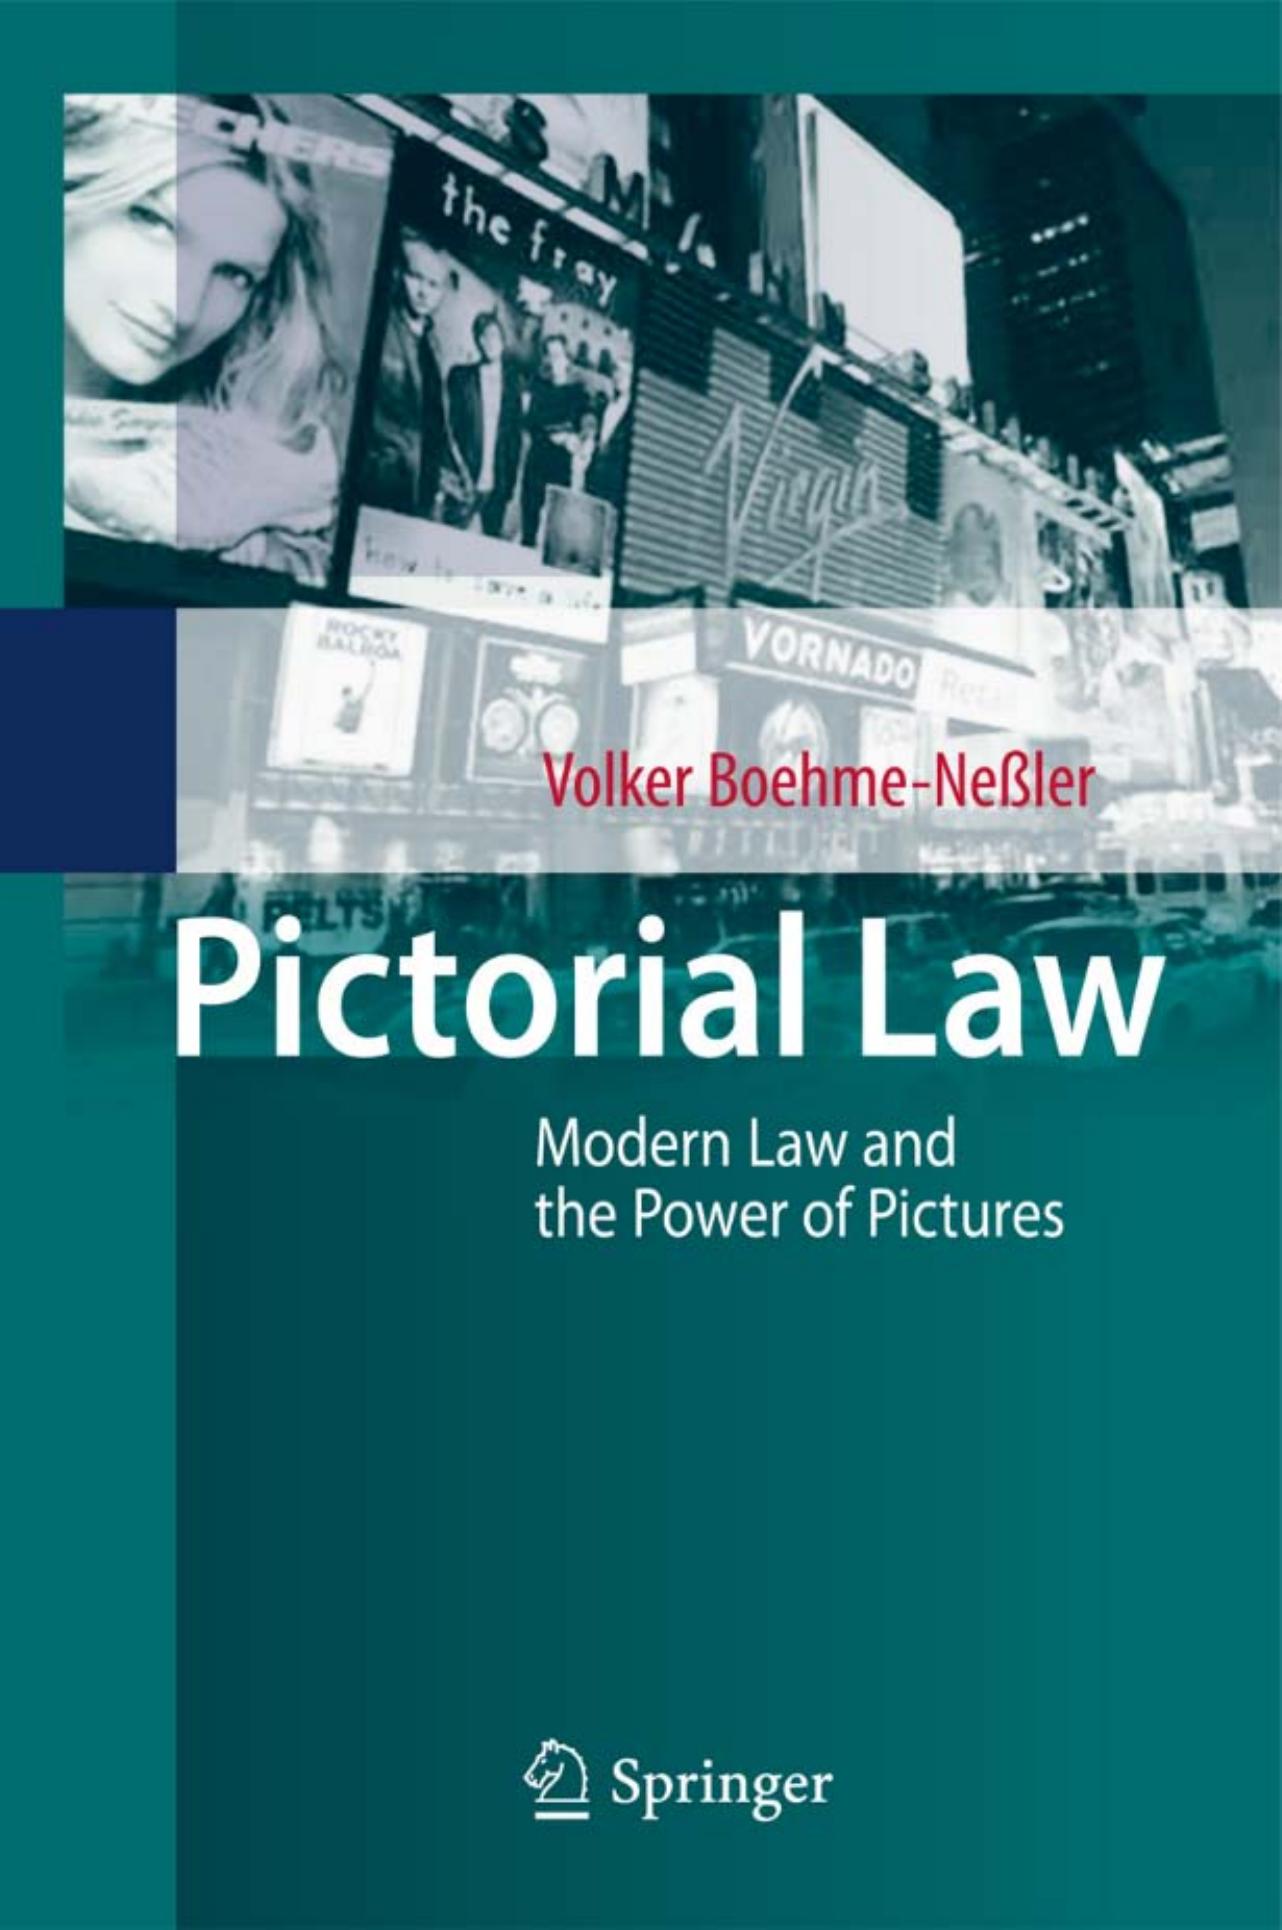 Pictorial Law: Modern Law and the Power of Pictures